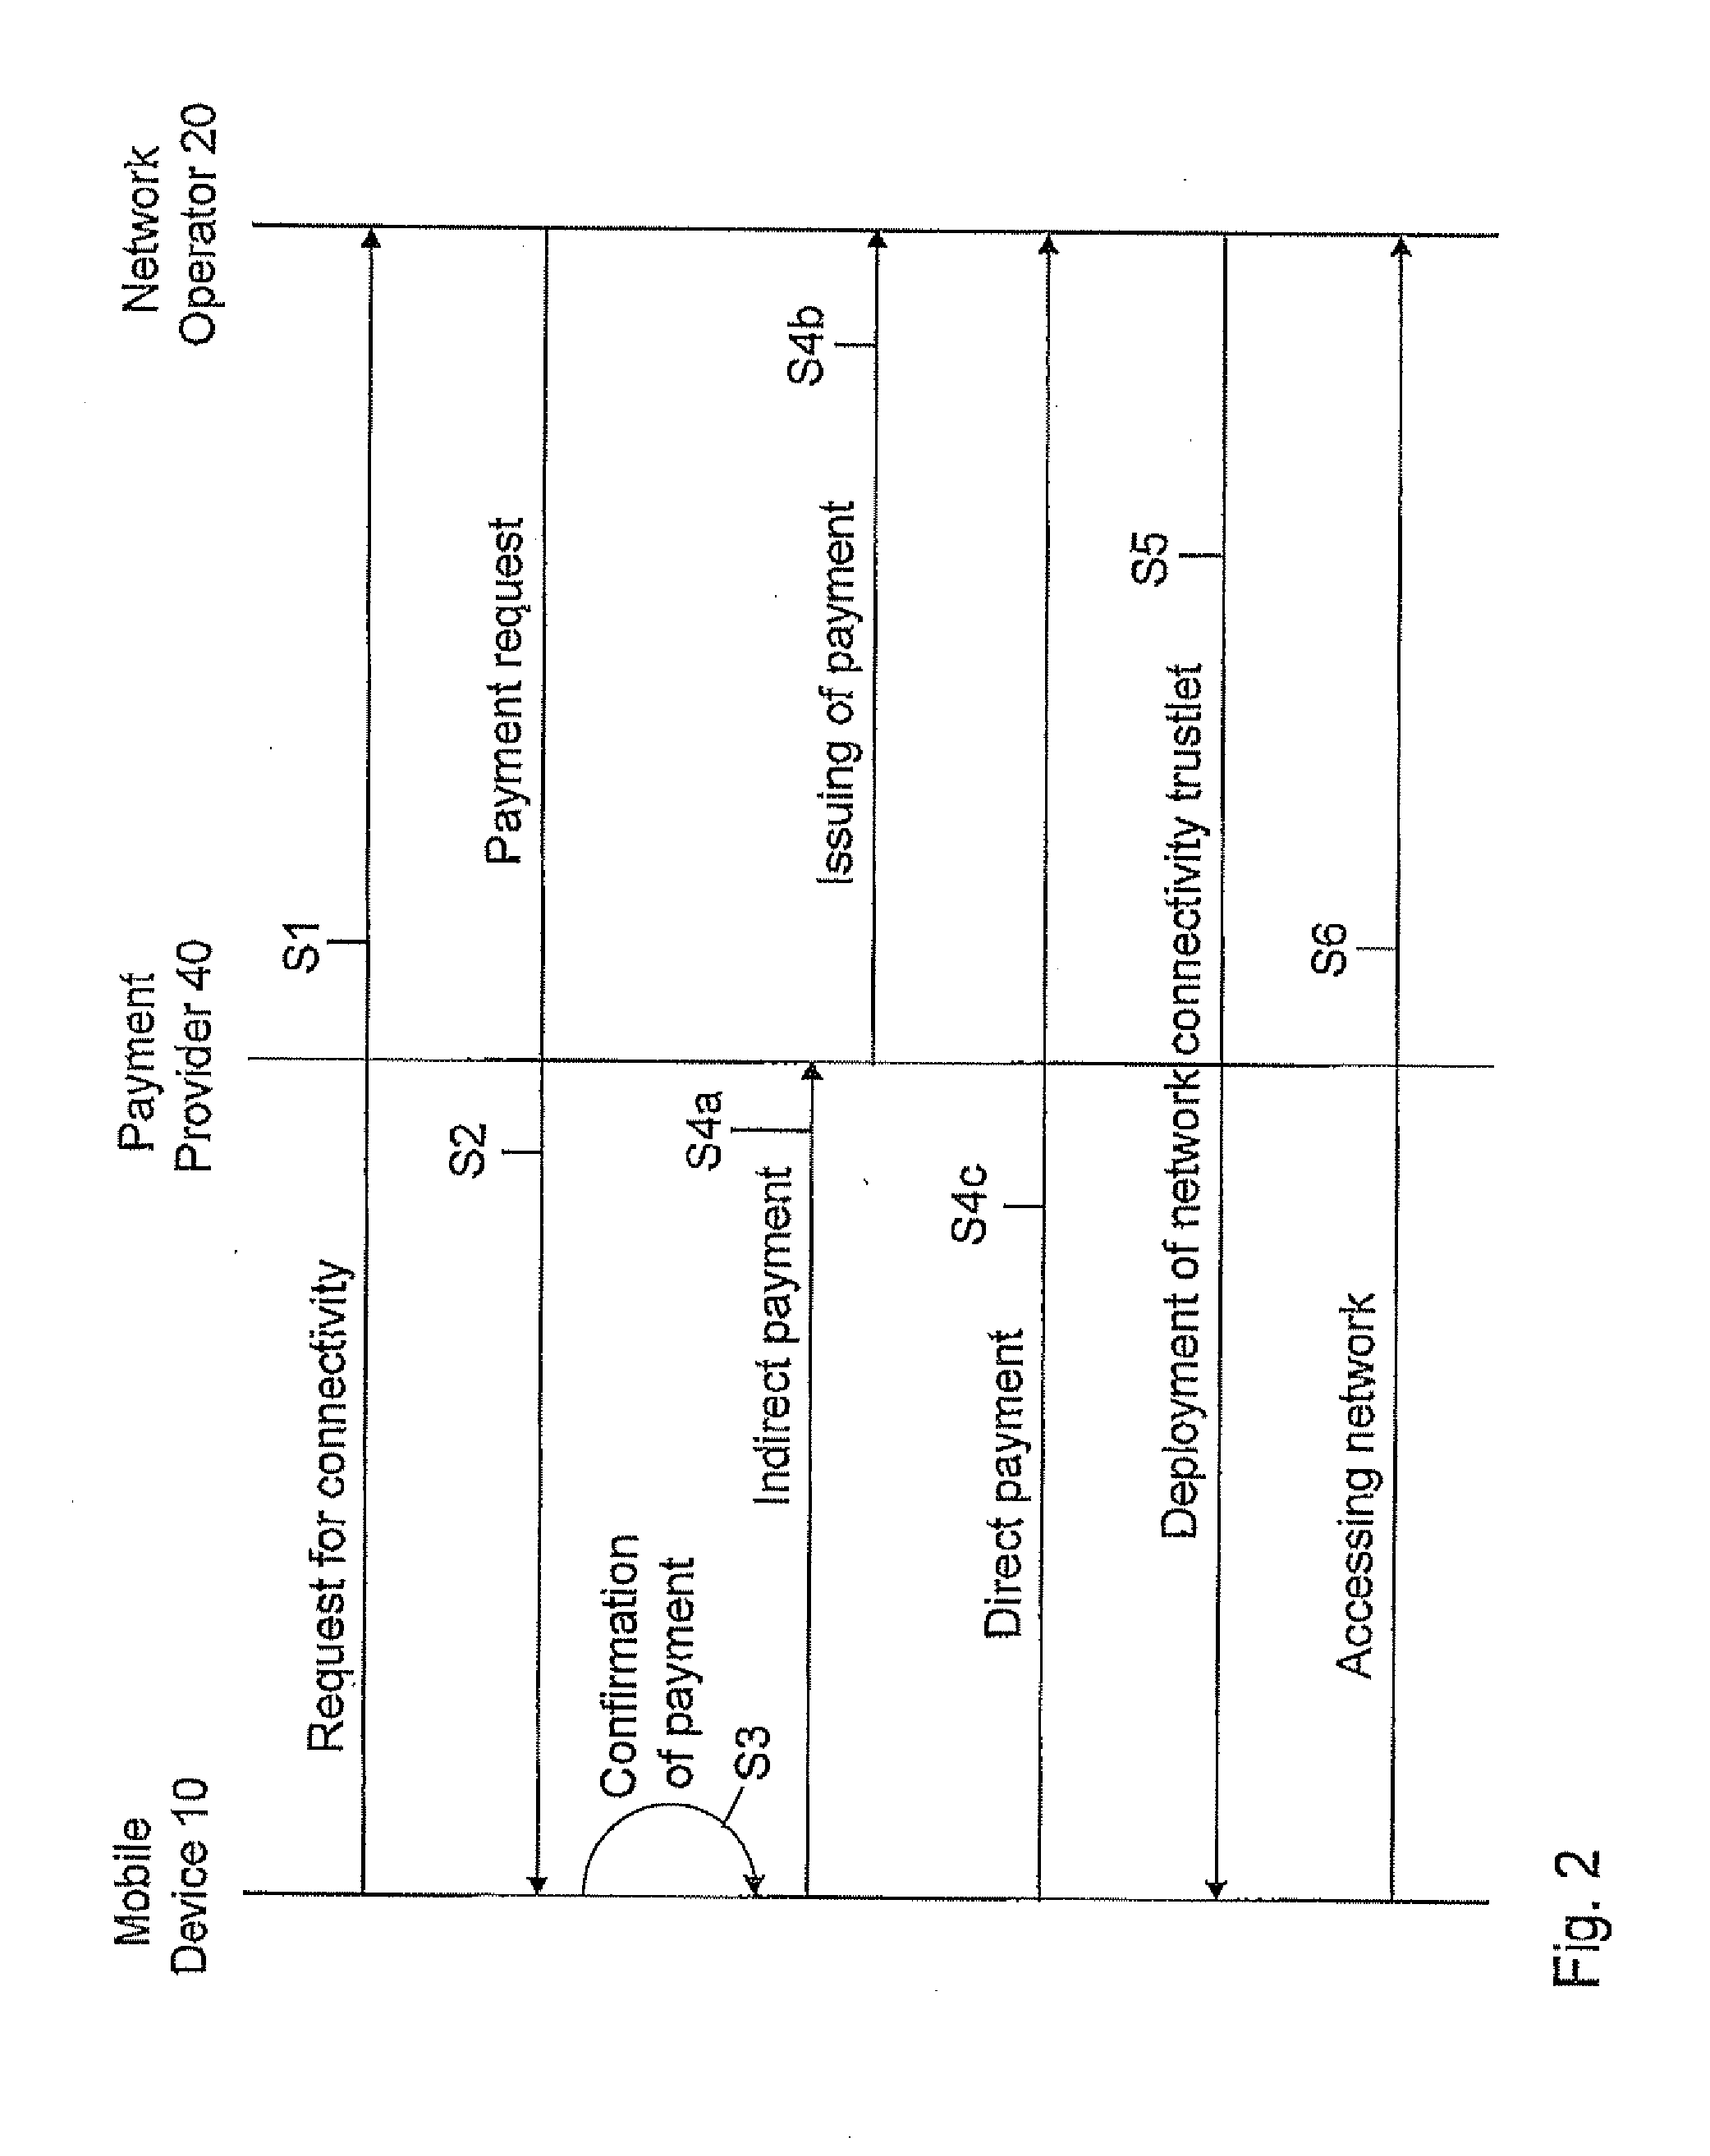 Method for provisioning of a network access for a mobile communication device